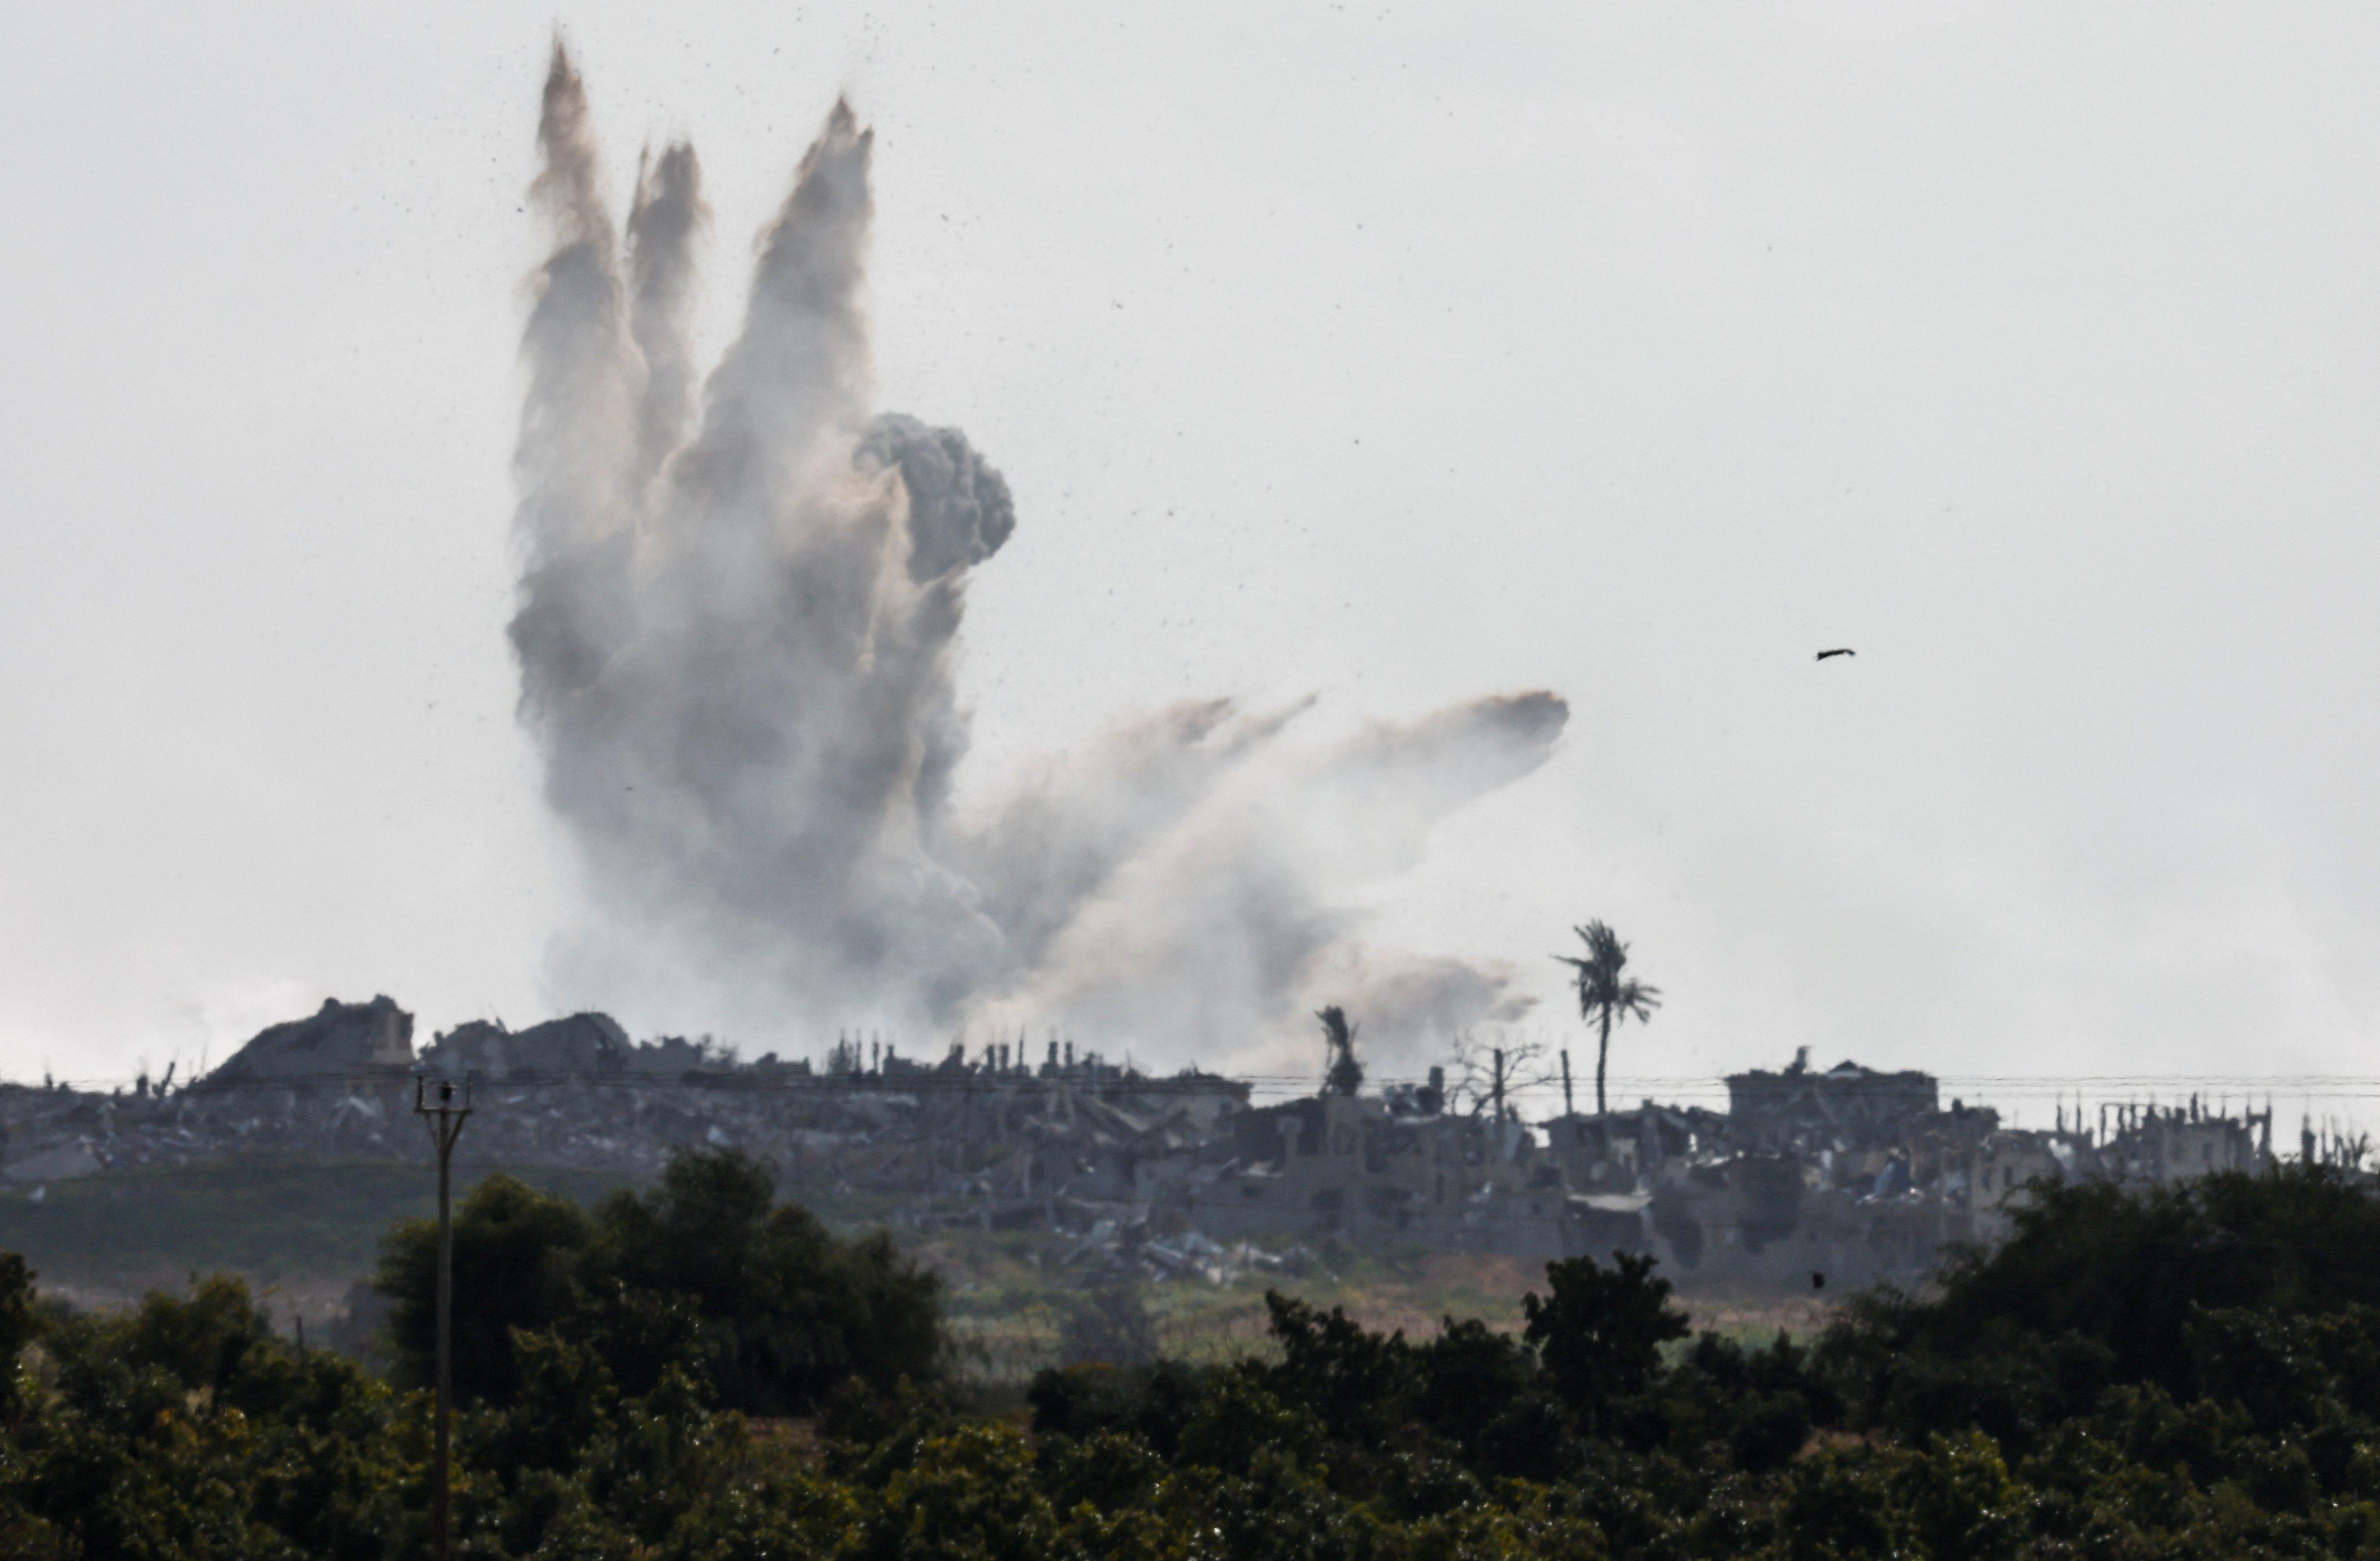 Smoke rises after an explosion in the Gaza Strip following an Israeli airstrike, as seen from Israel's border with Gaza in southern Israel